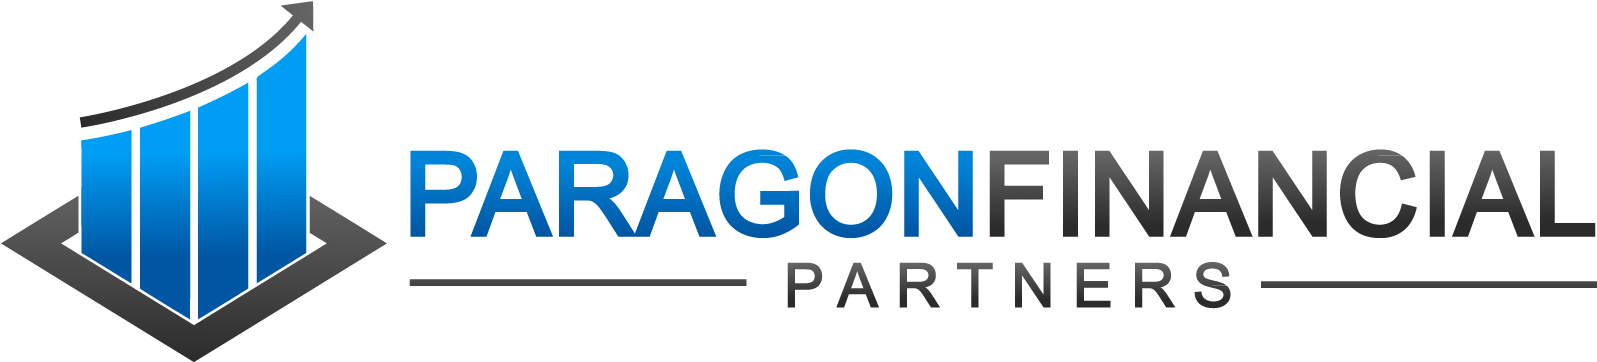 Expert Financial Advice That Prepares You For Life's - Paragon Financial Partners (1599x515), Png Download